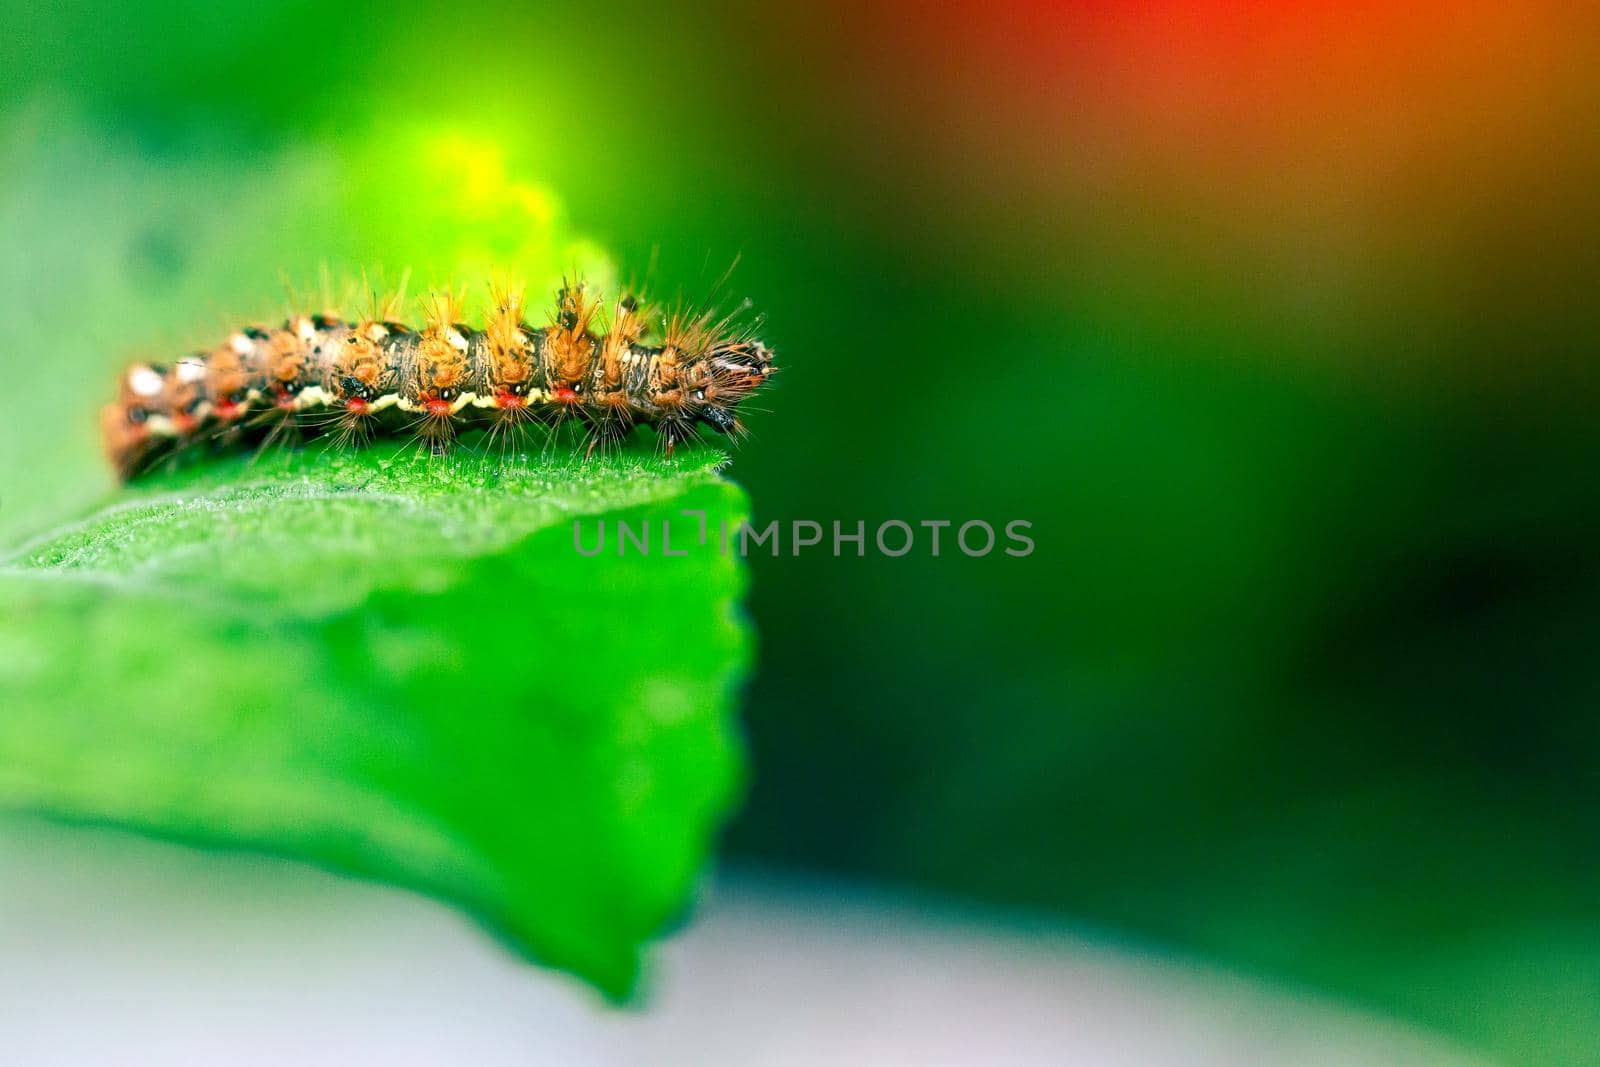 Shaggy caterpillar on a green leaf close-up macro view